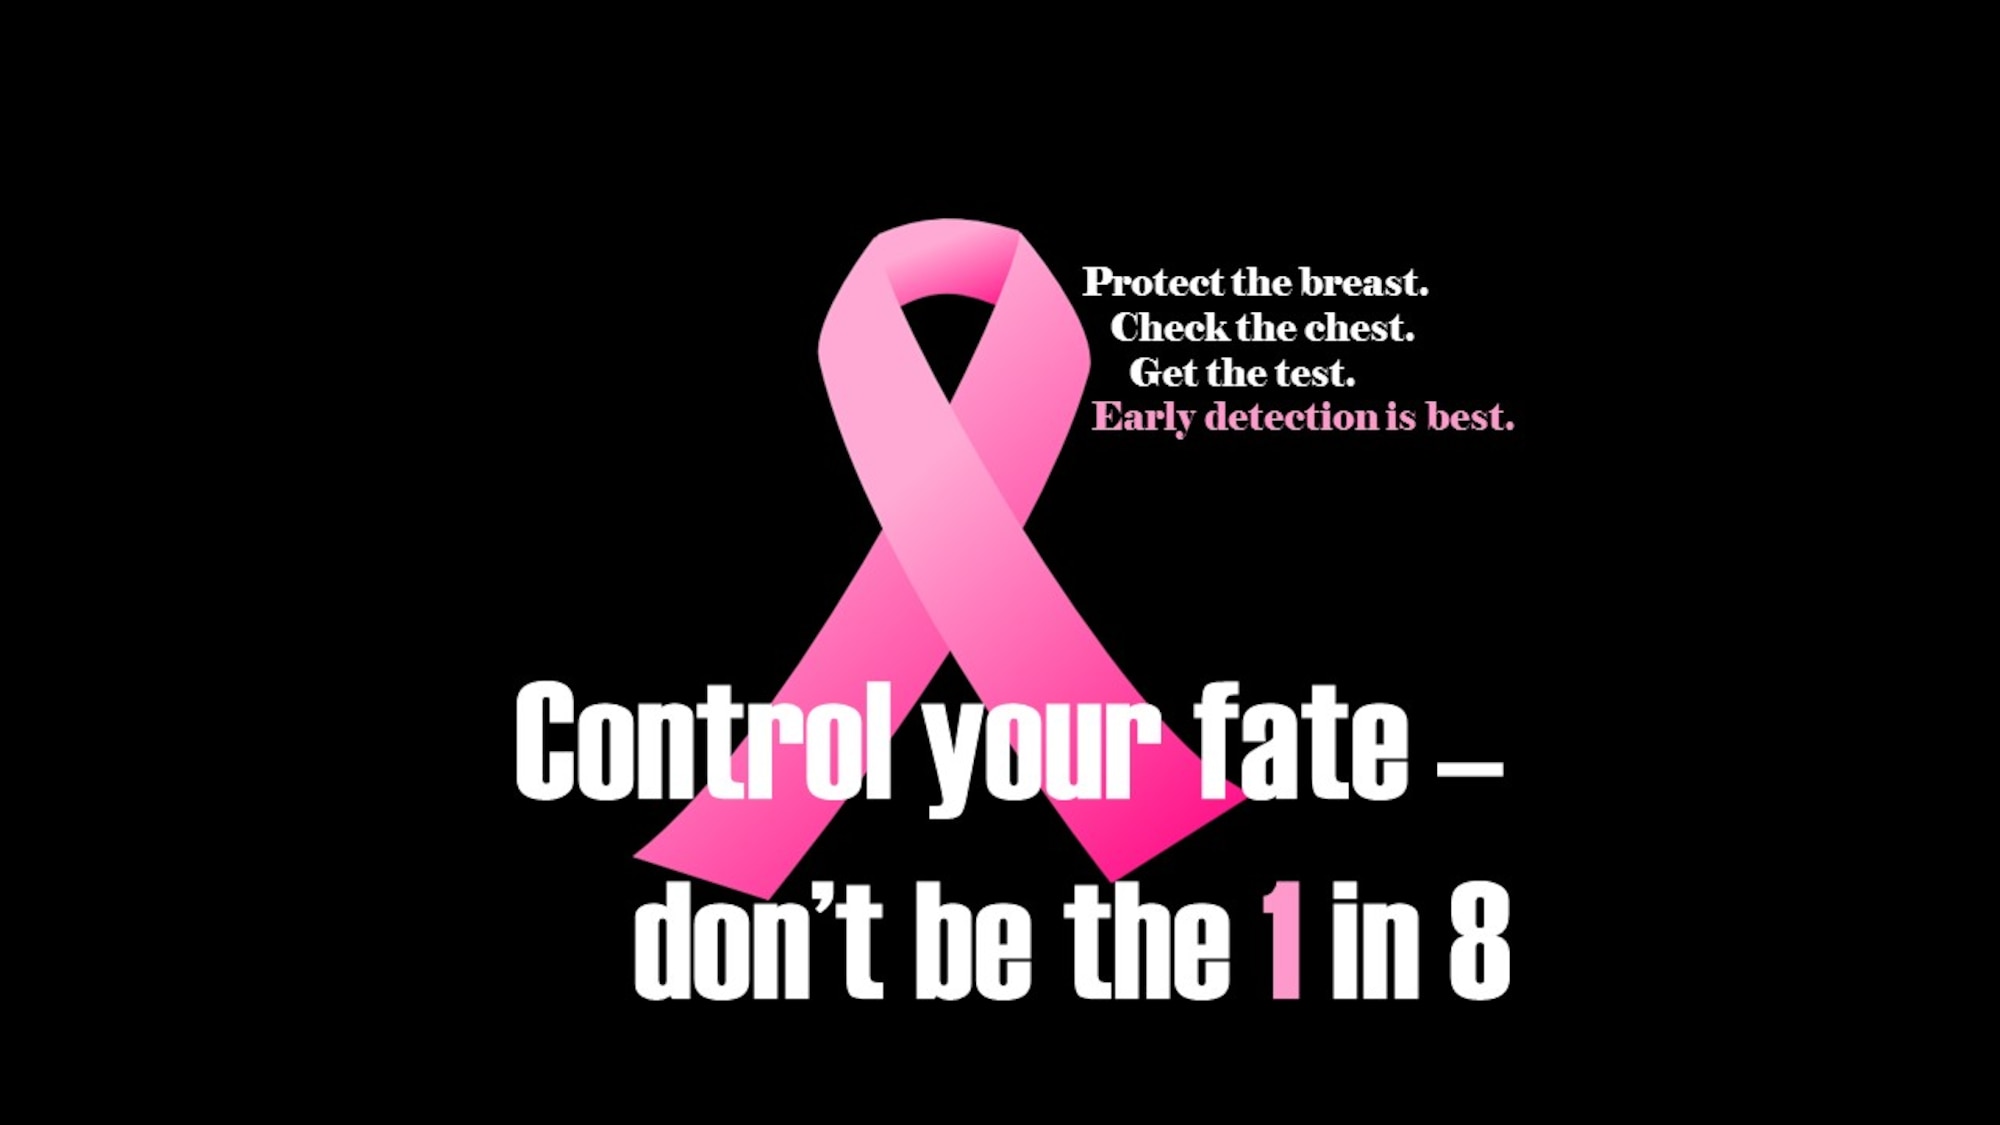 October is Breast Cancer Awareness Month, during which all women are encouraged to perform self-exams, schedule mammograms and place importance on breast health. According to the American Cancer Society, over 250,000 women will have been diagnosed with breast cancer by the end of 2017. This estimate translates to roughly one in every eight women. Fortunately, improvements in early detection tests have reduced the mortality rate of patients by 38 percent. (U.S. Air Force graphic by Master Sgt. Heidi West)